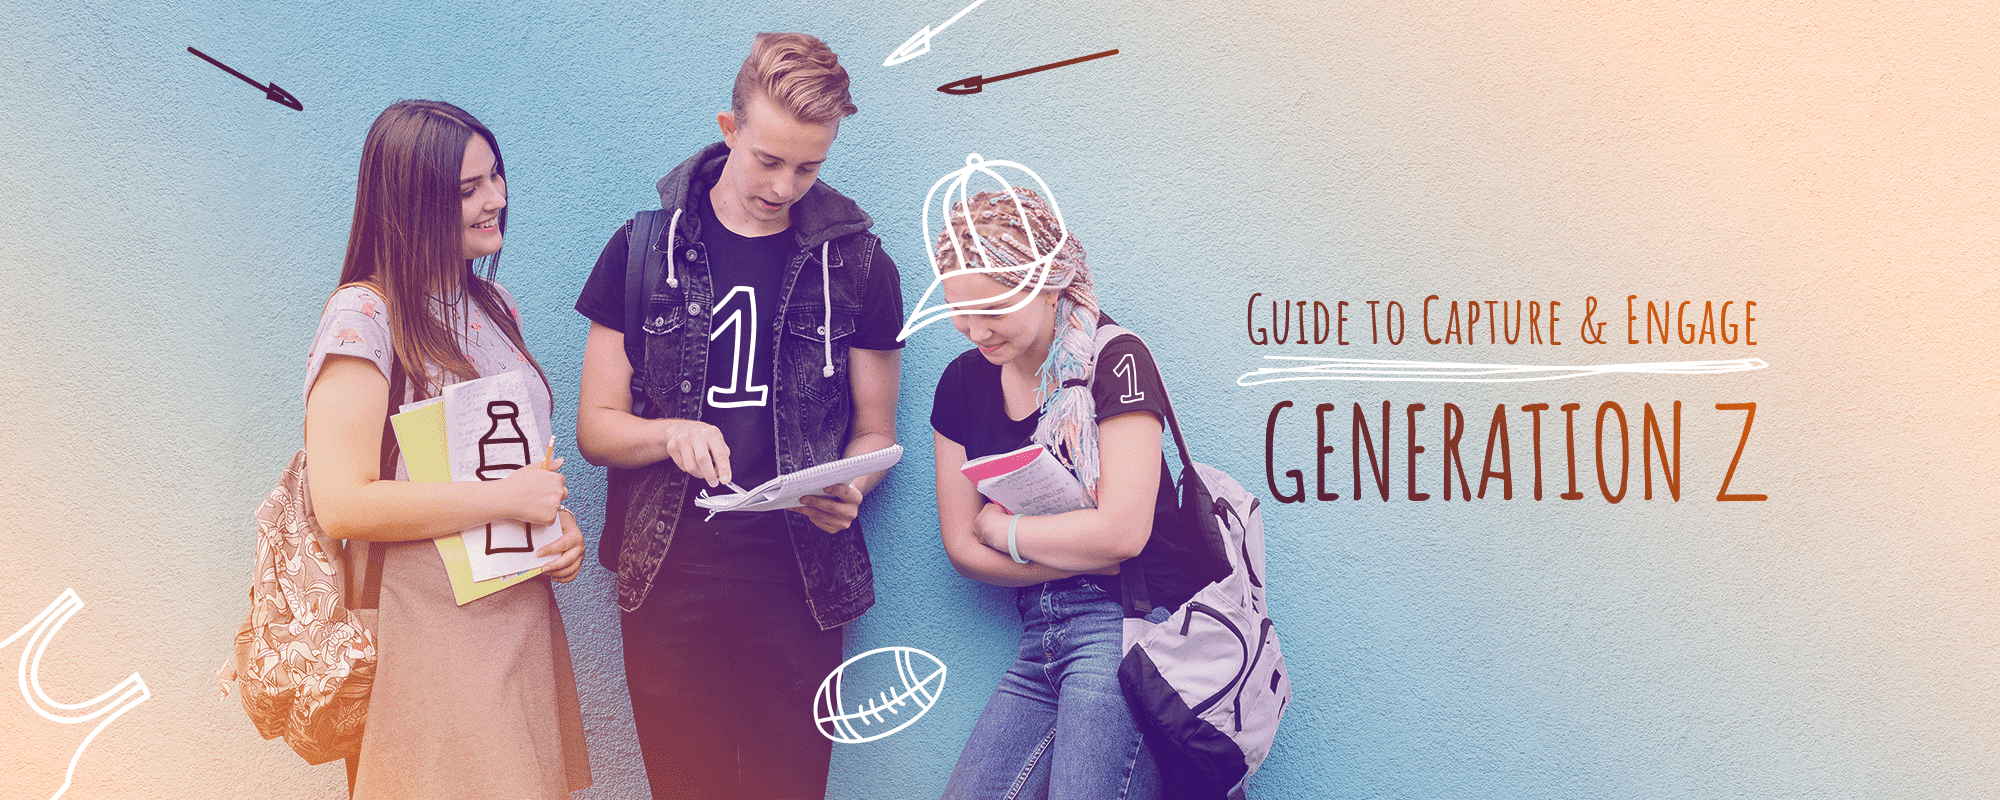 An Extensive Guide to Engage and Capture Generation Z